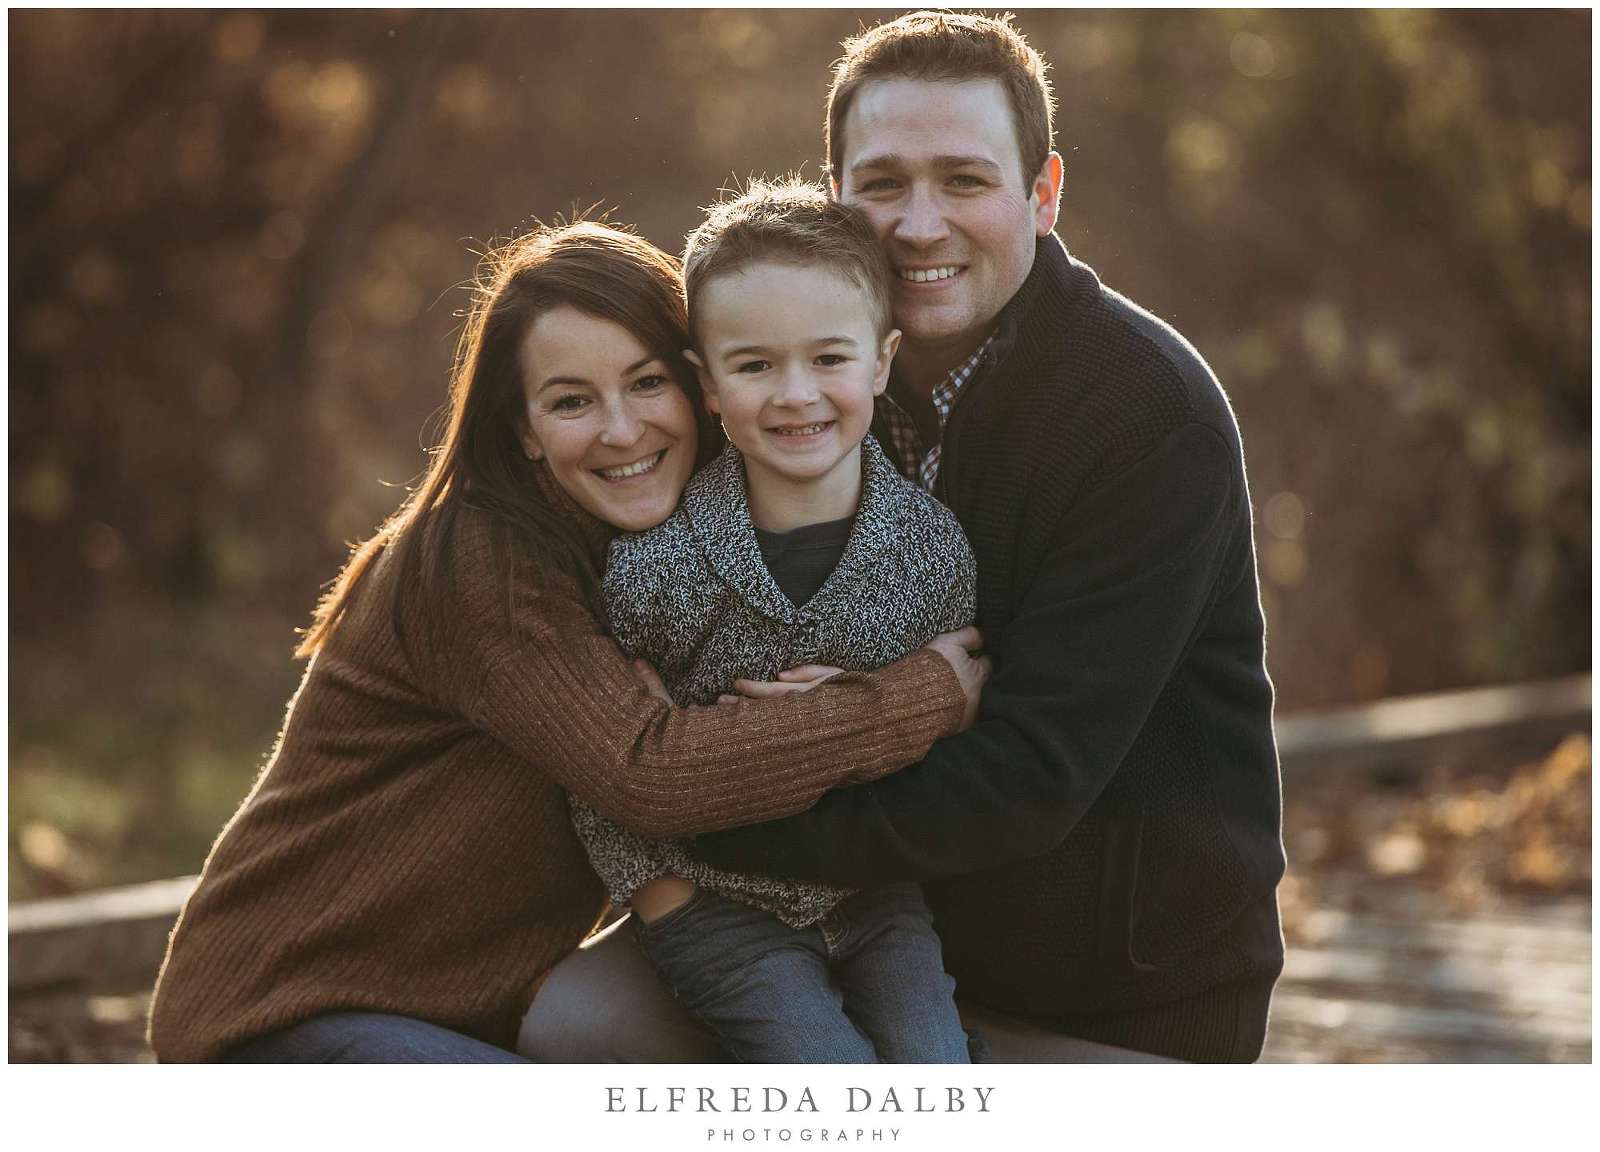 family of three photo poses | family of 3 | family poses | Photography poses  family, Family photo pose, Family picture poses